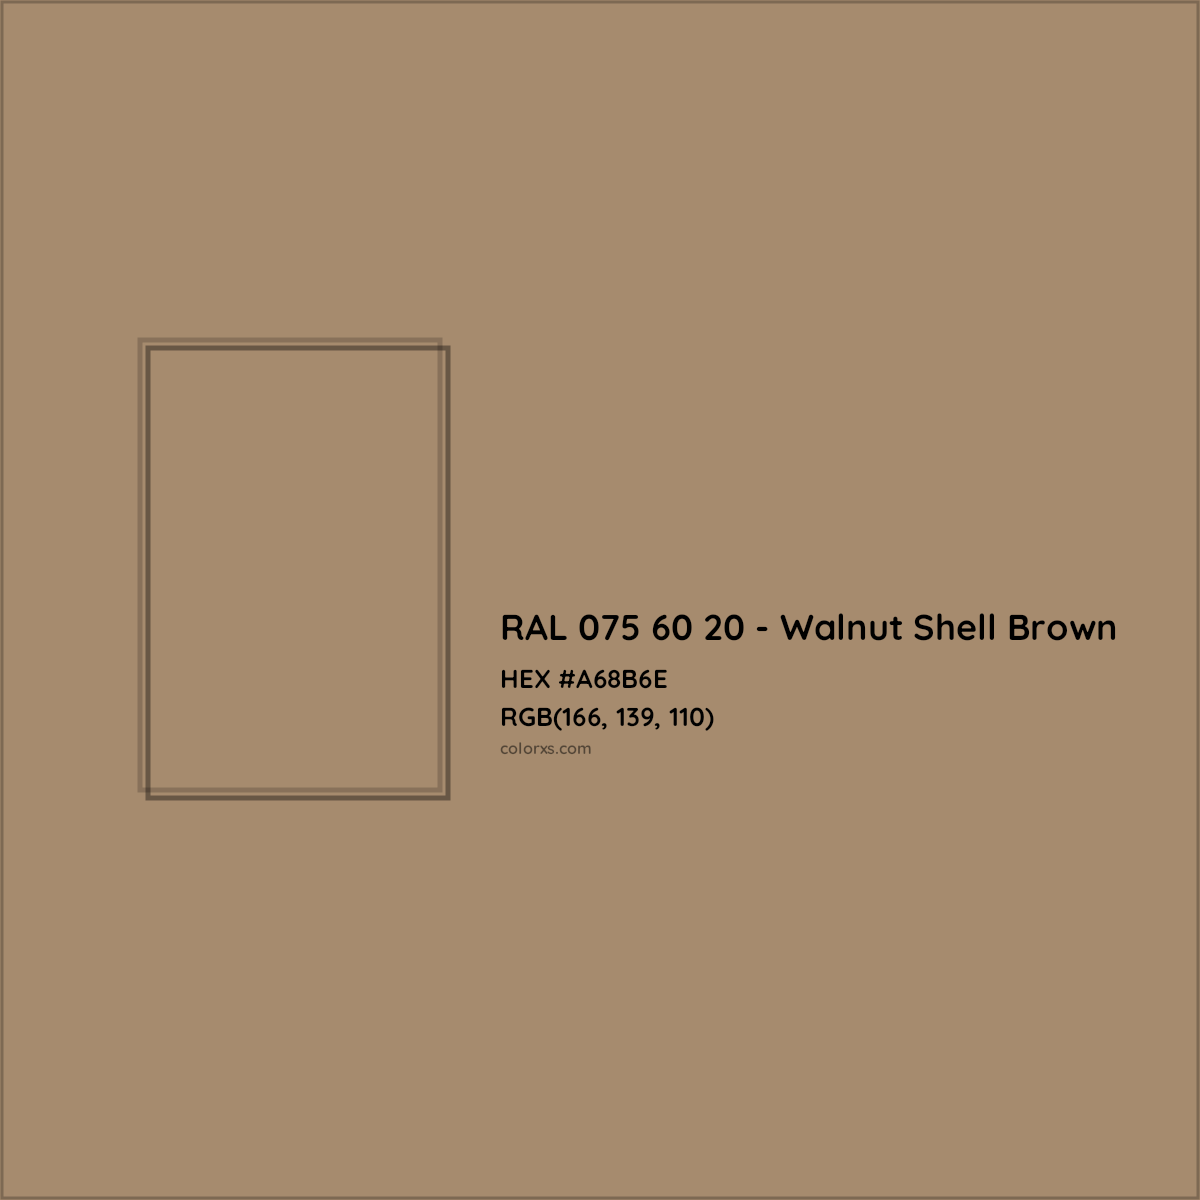 HEX #A68B6E RAL 075 60 20 - Walnut Shell Brown CMS RAL Design - Color Code